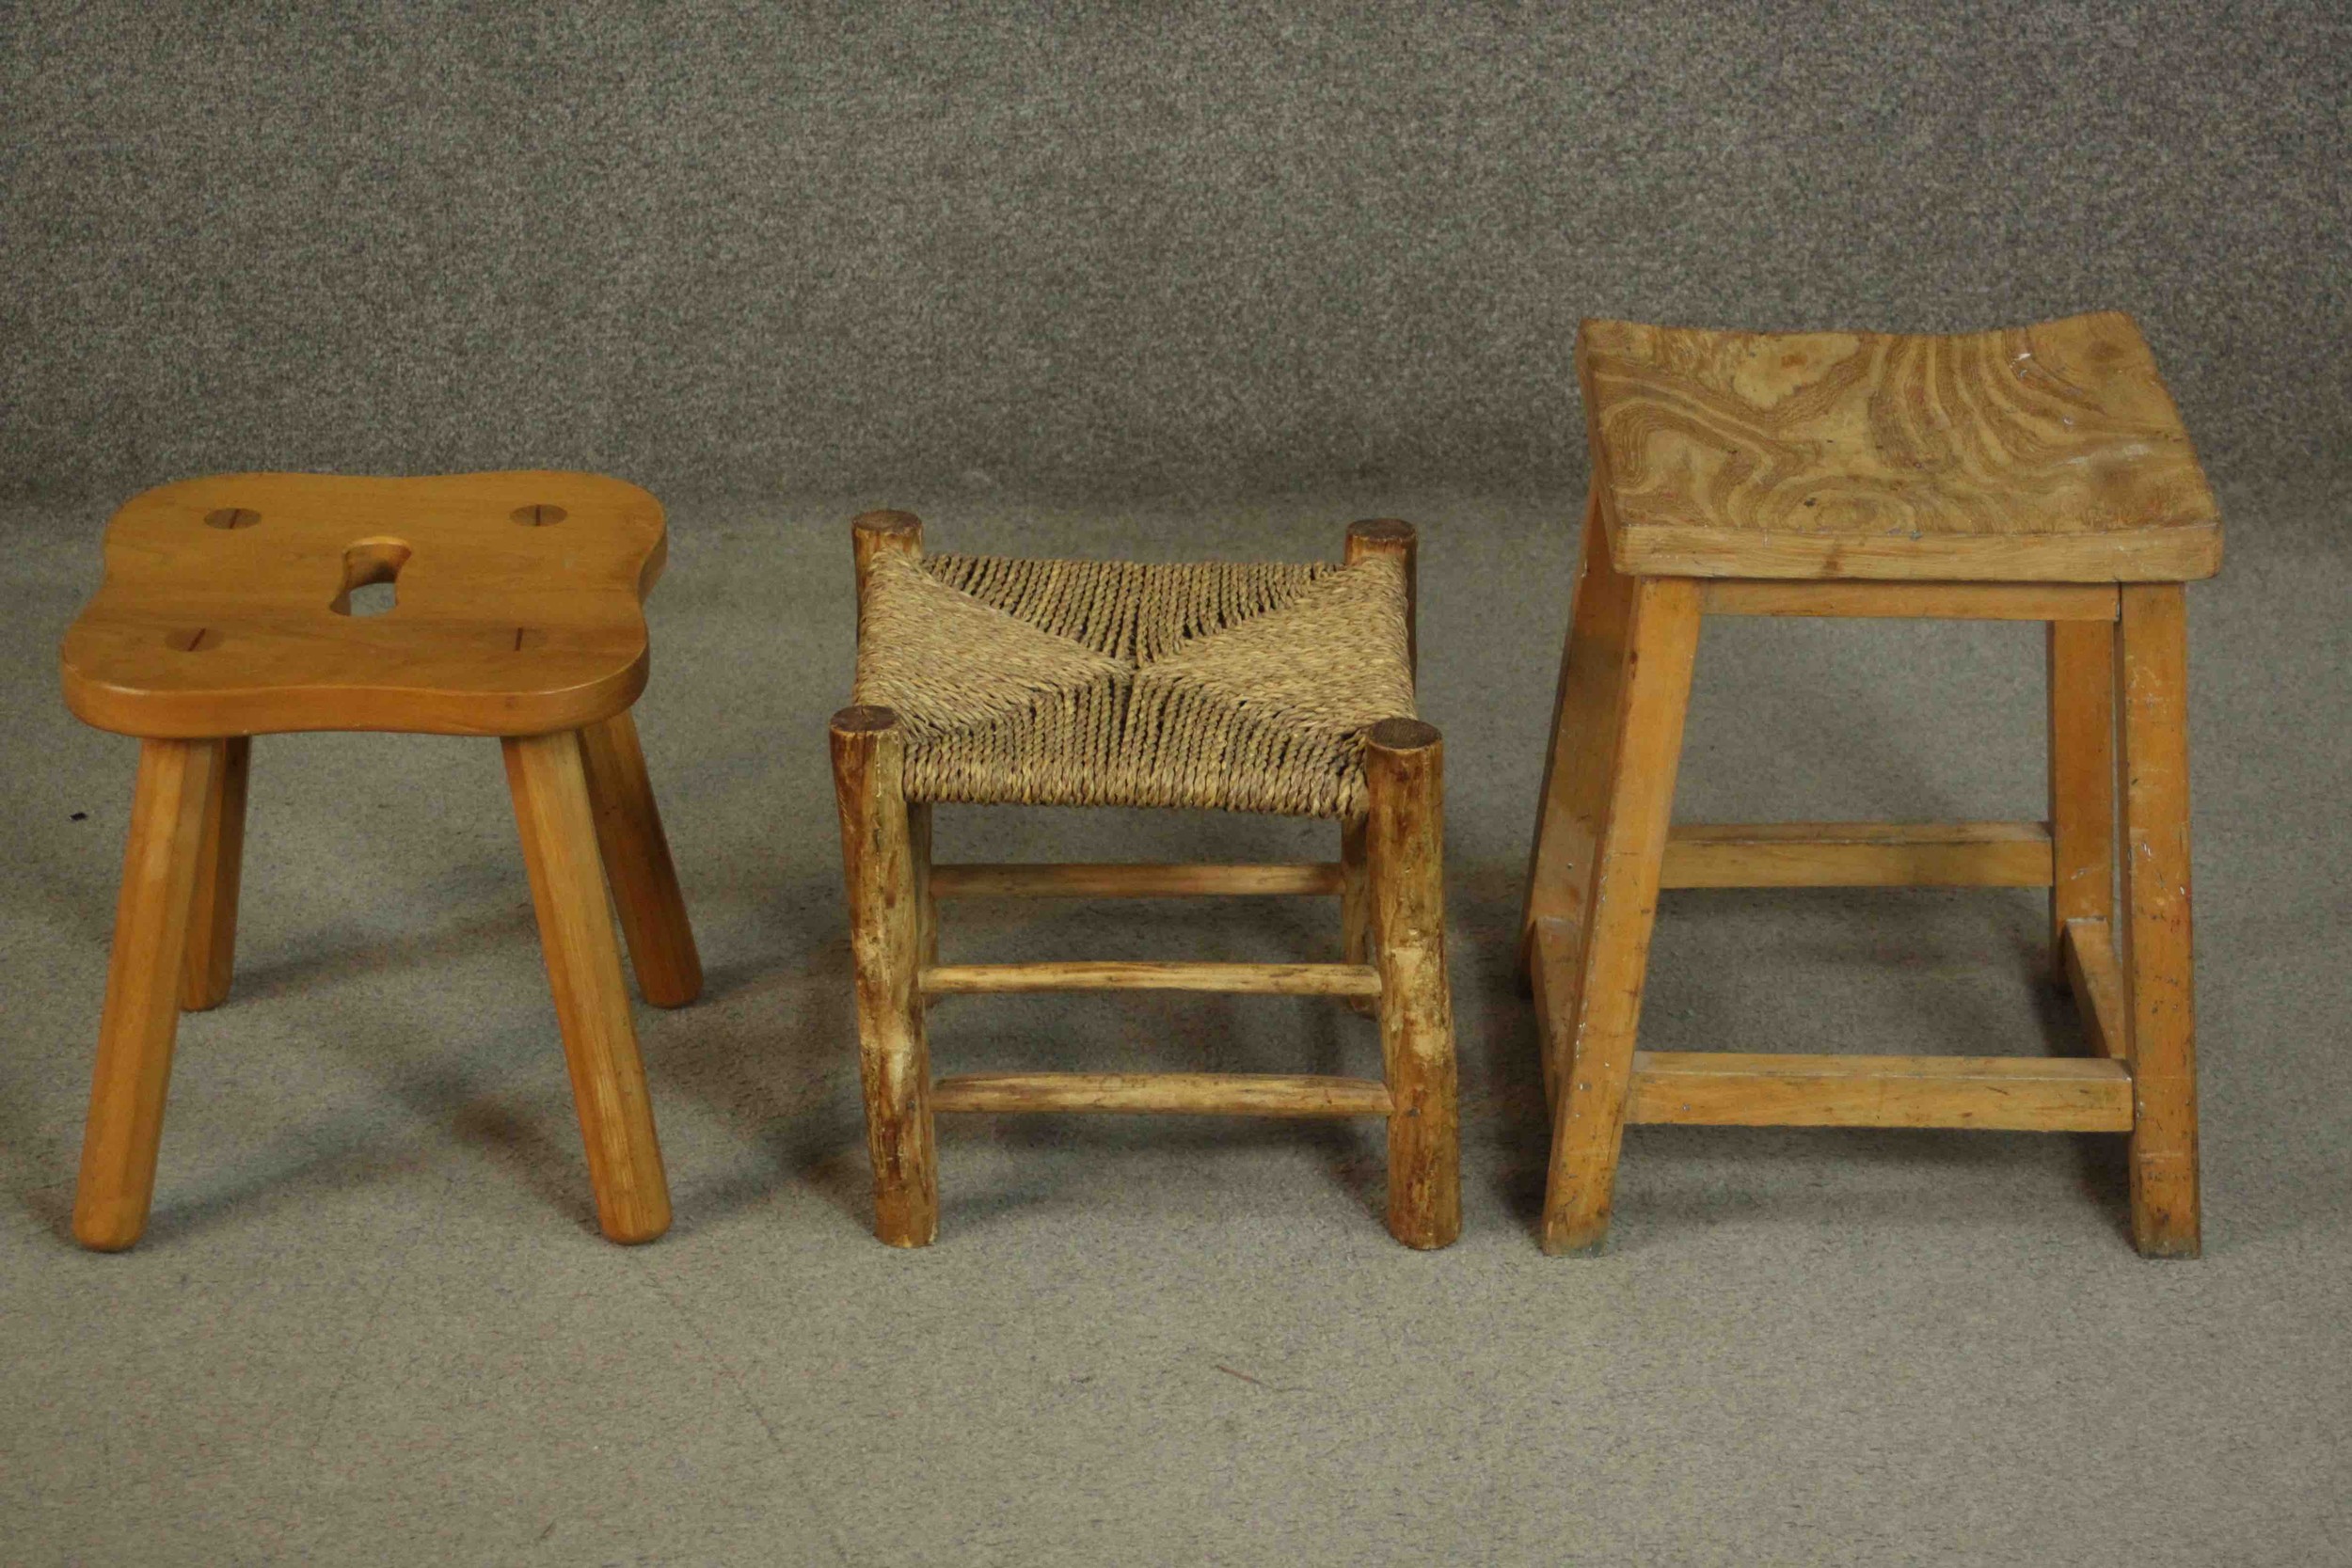 A collection of three stools, including an elm example with a shaped seat and hand hole, a stool